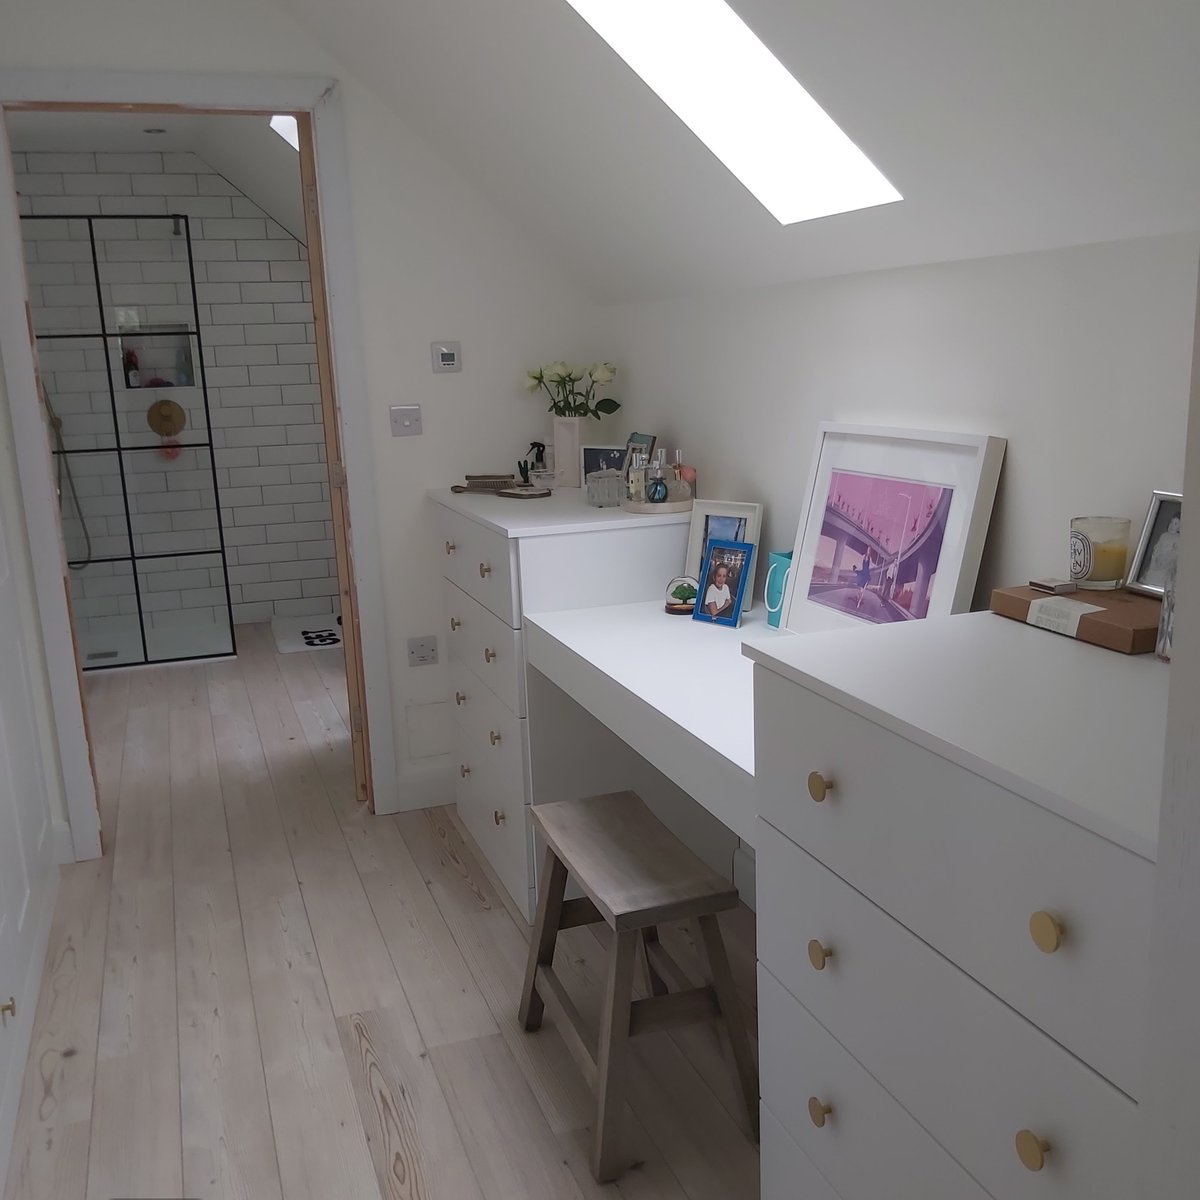 Tell Us Tuesday!
Who's loving this gorgeous dressing room area leading to an ensuite bathroom that was recently created for a My Fitted Bedroom customer?
#tellustuesday #dressingroominspo #fittedfurniture #realcustomerhomes #dressingroomgoals